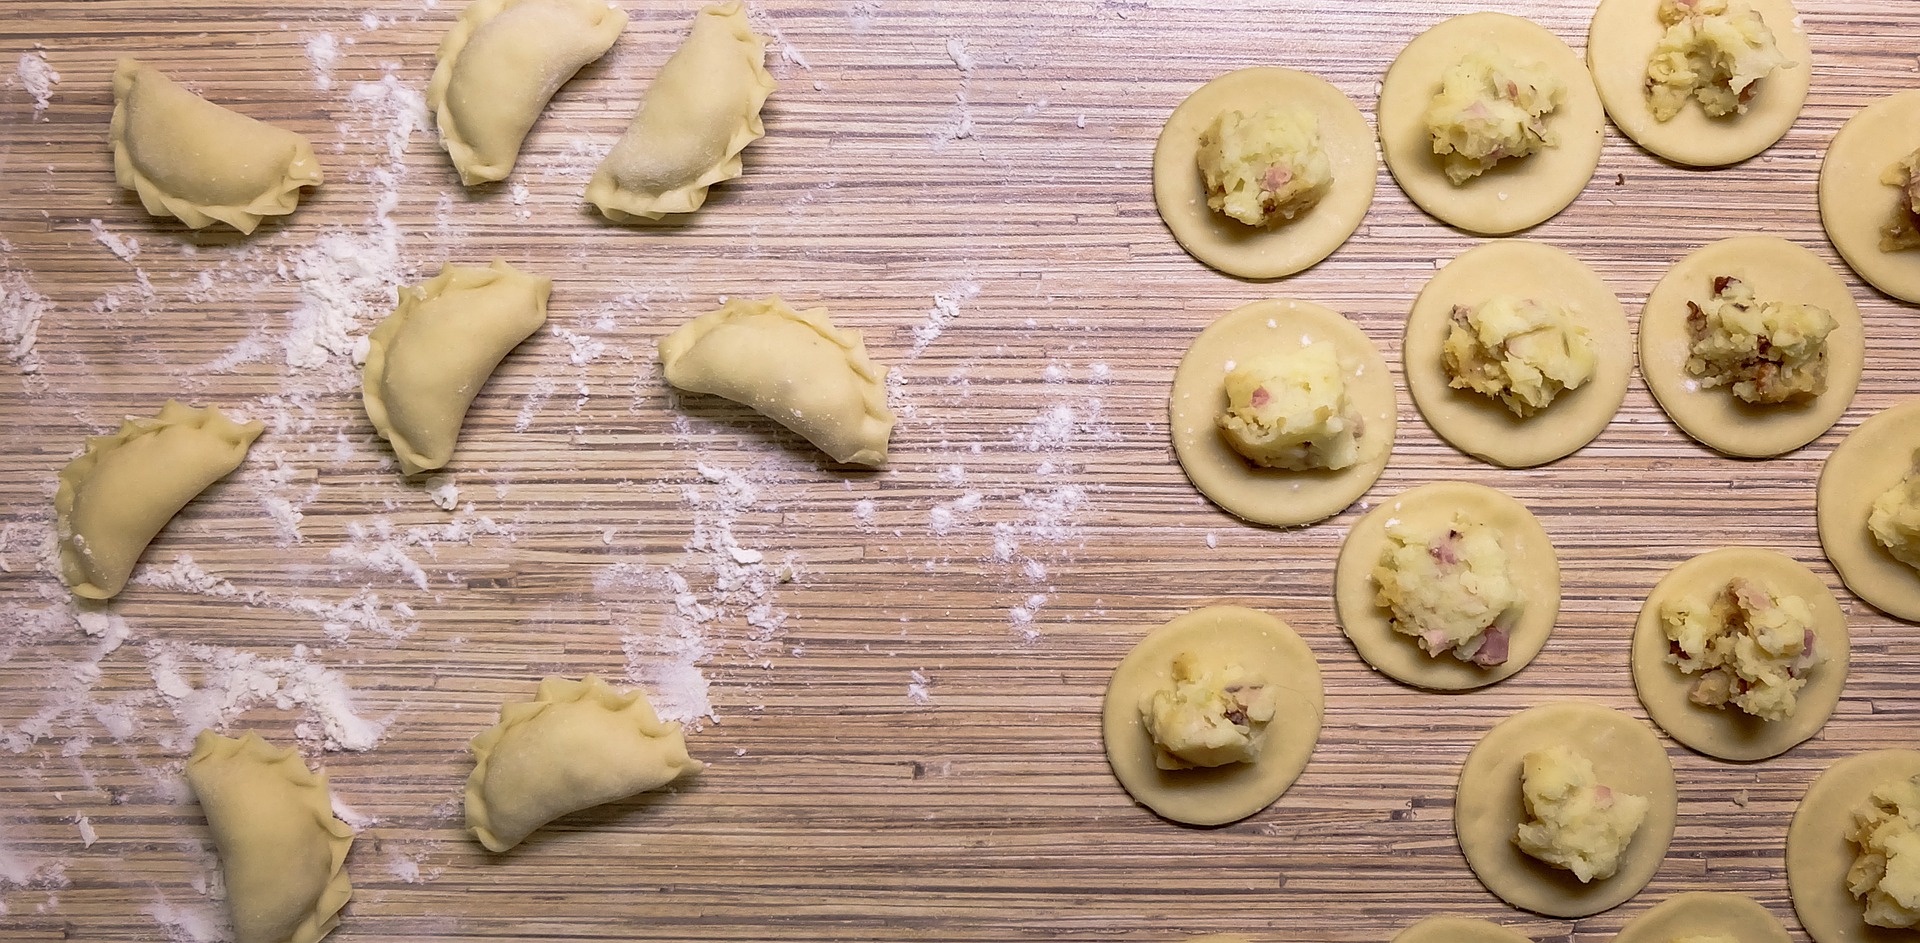 All about dumplings: instant recipes